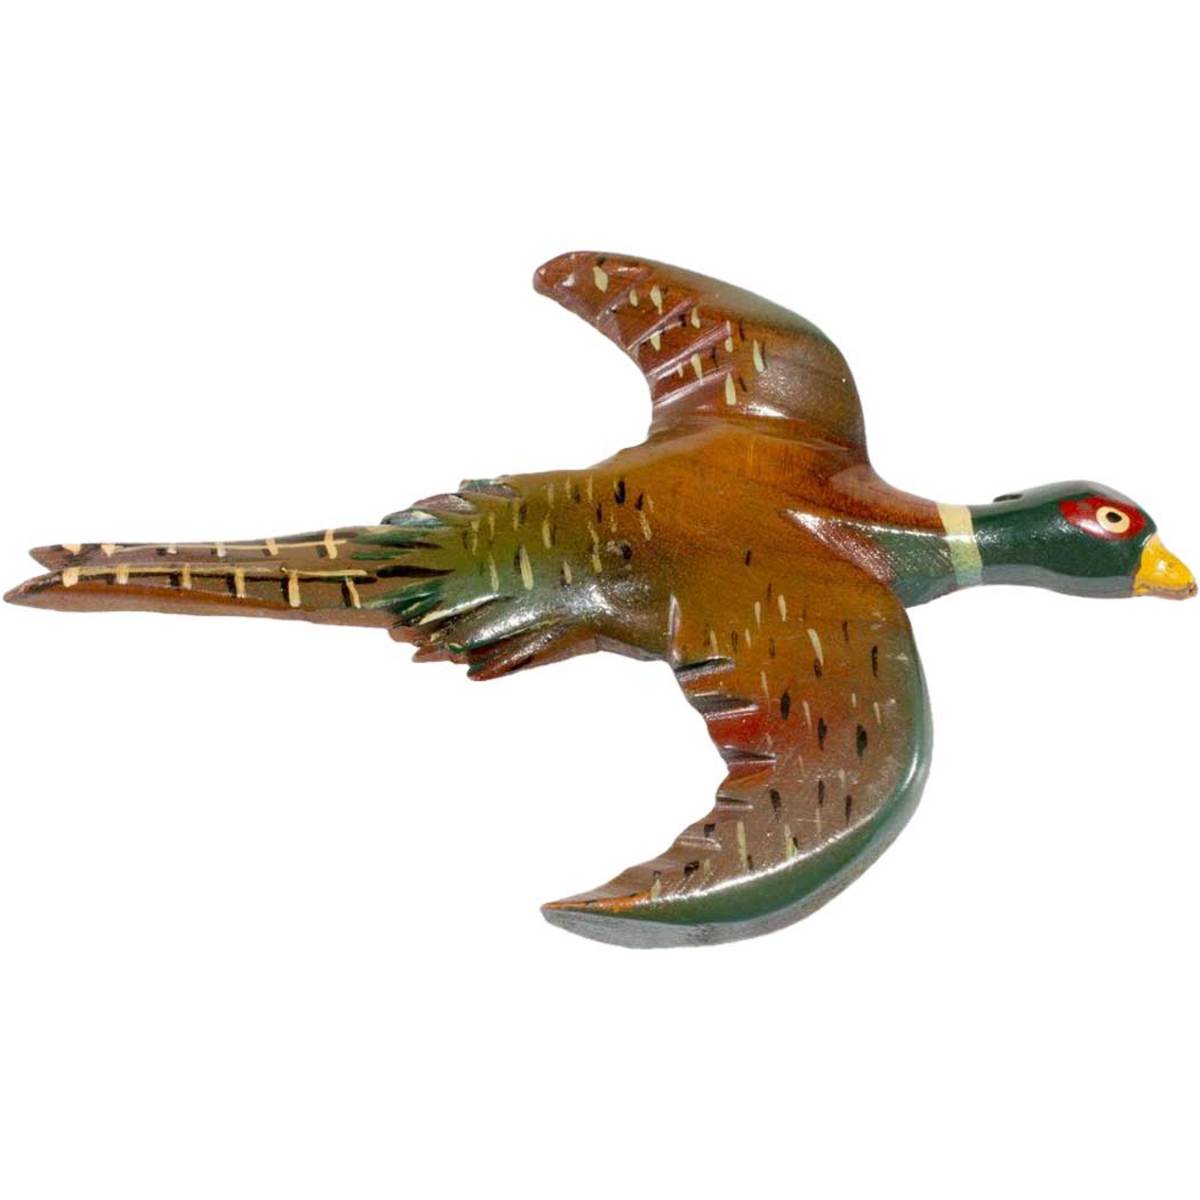 Painted wooden pheasant brooch, 1940s.